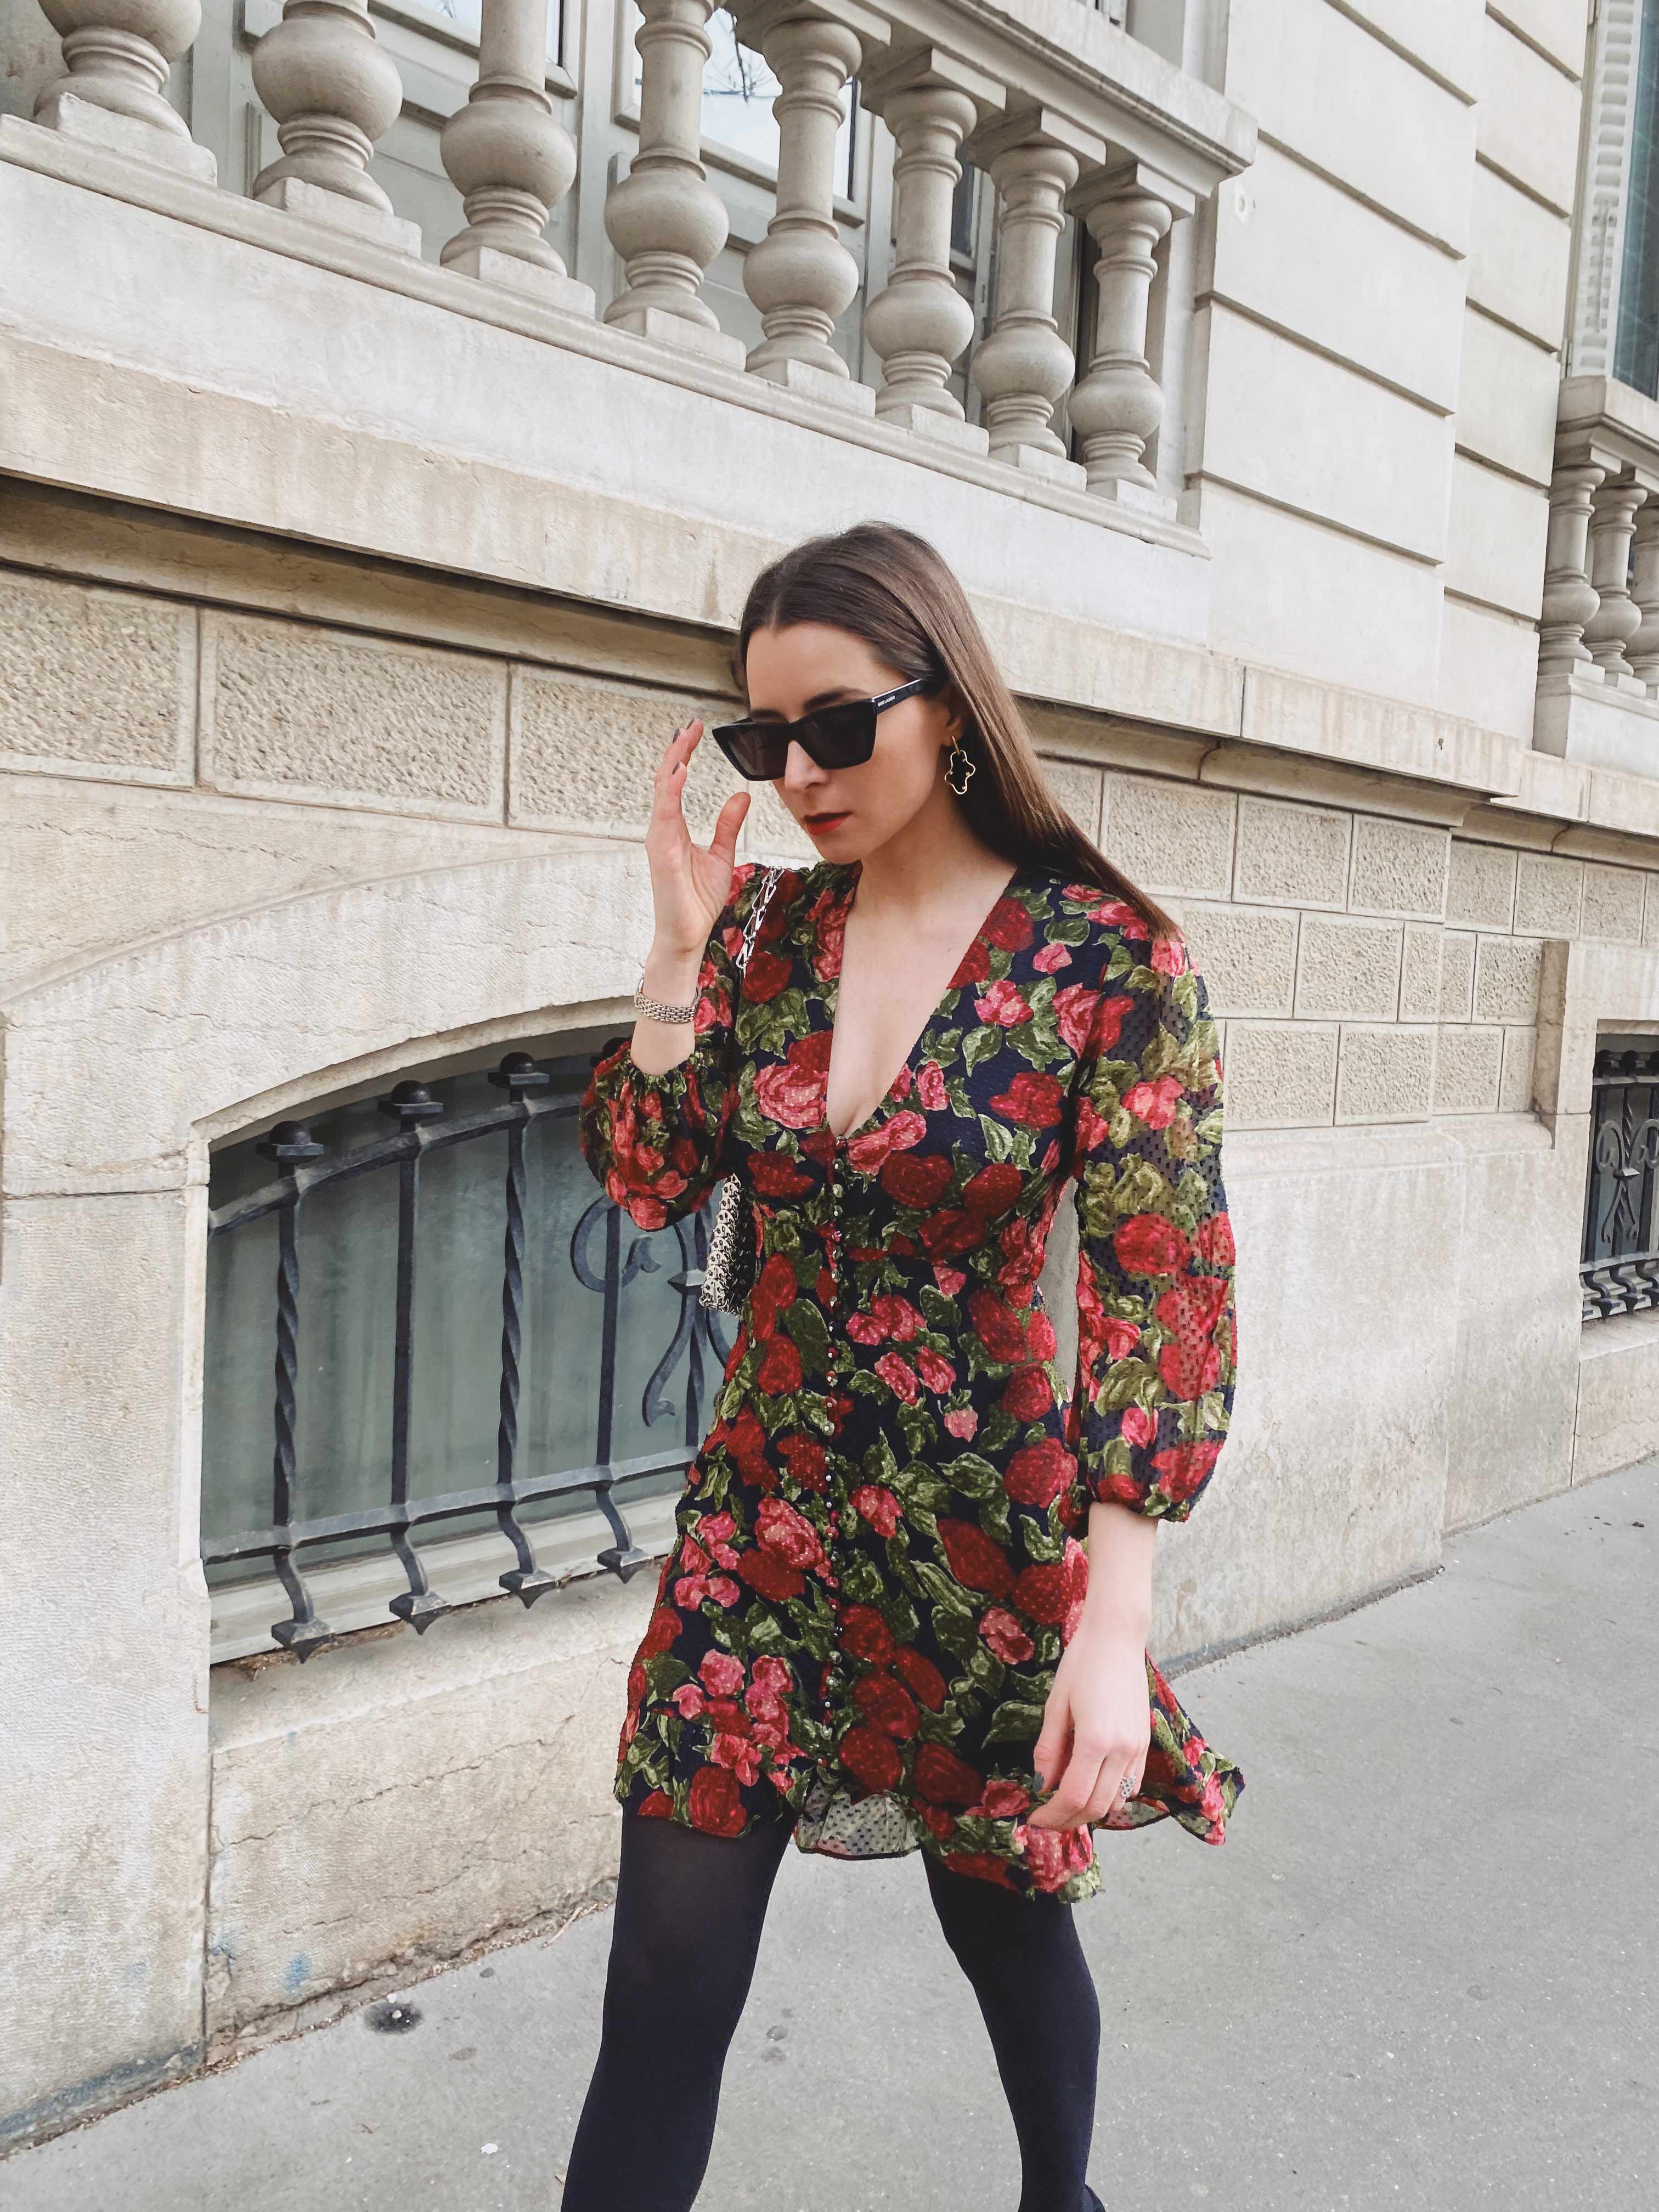 Valentine's day outfit ideas 2020 dress the kooples floral dress